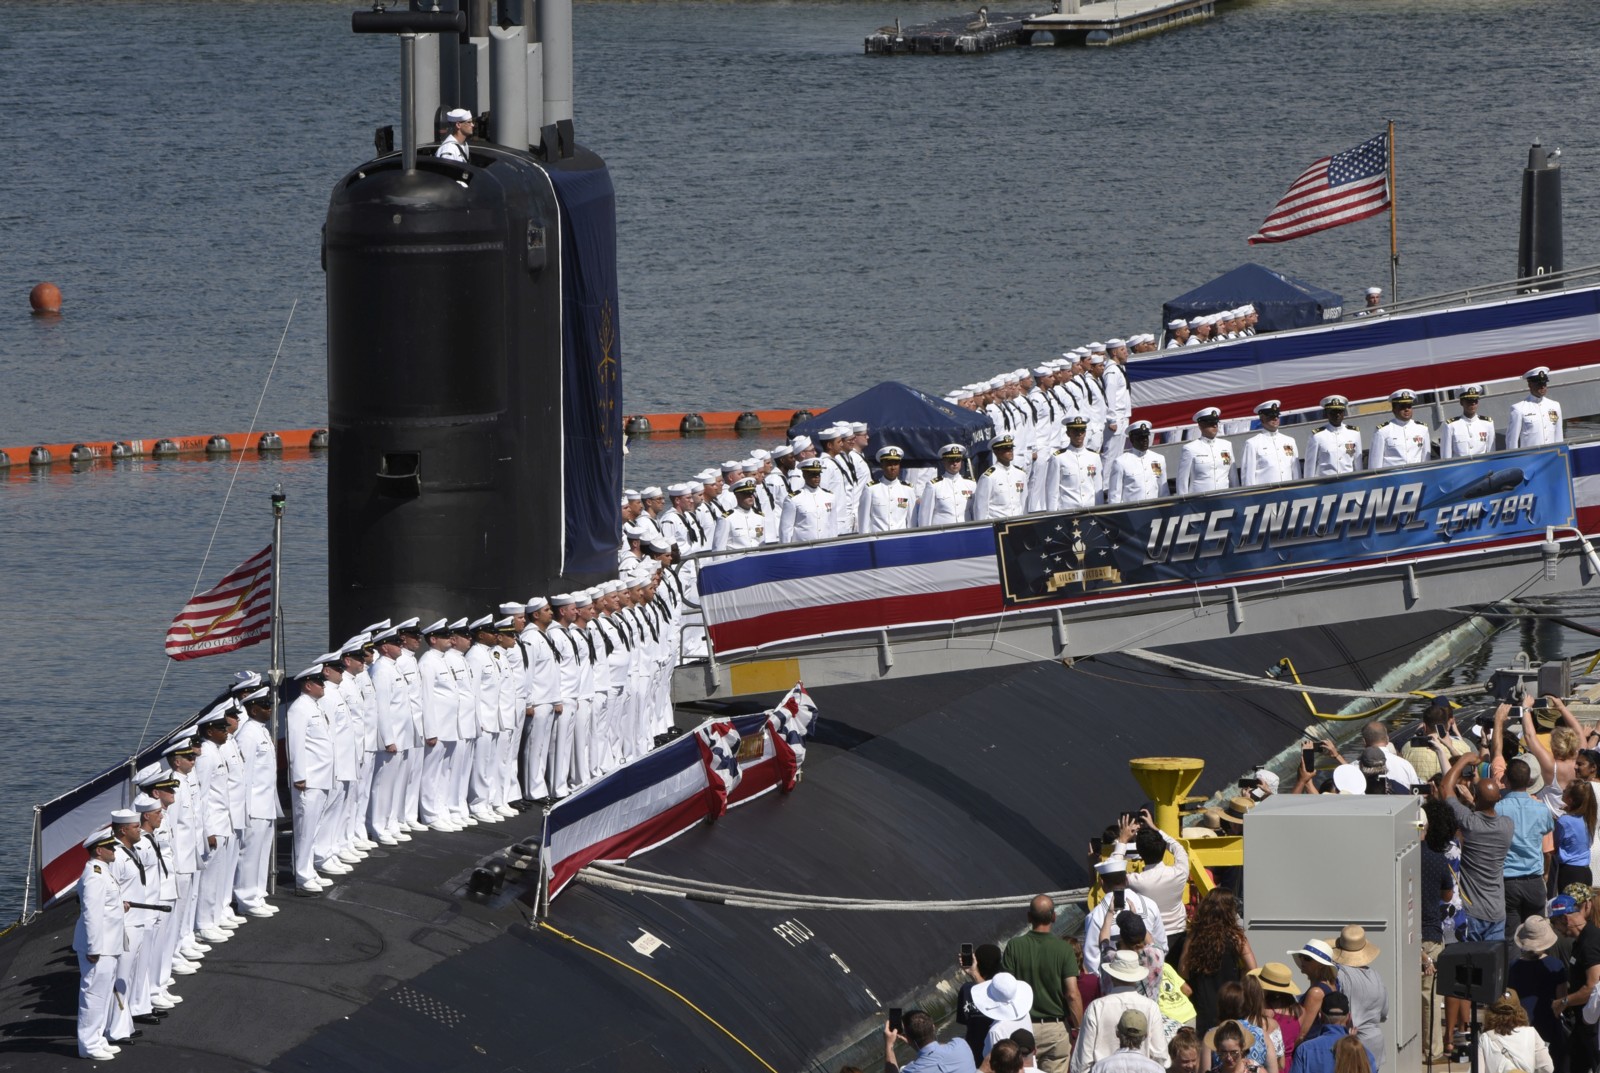 ssn-789 uss indiana virginia class attack submarine us navy commissioning ceremony port canaveral florida 33